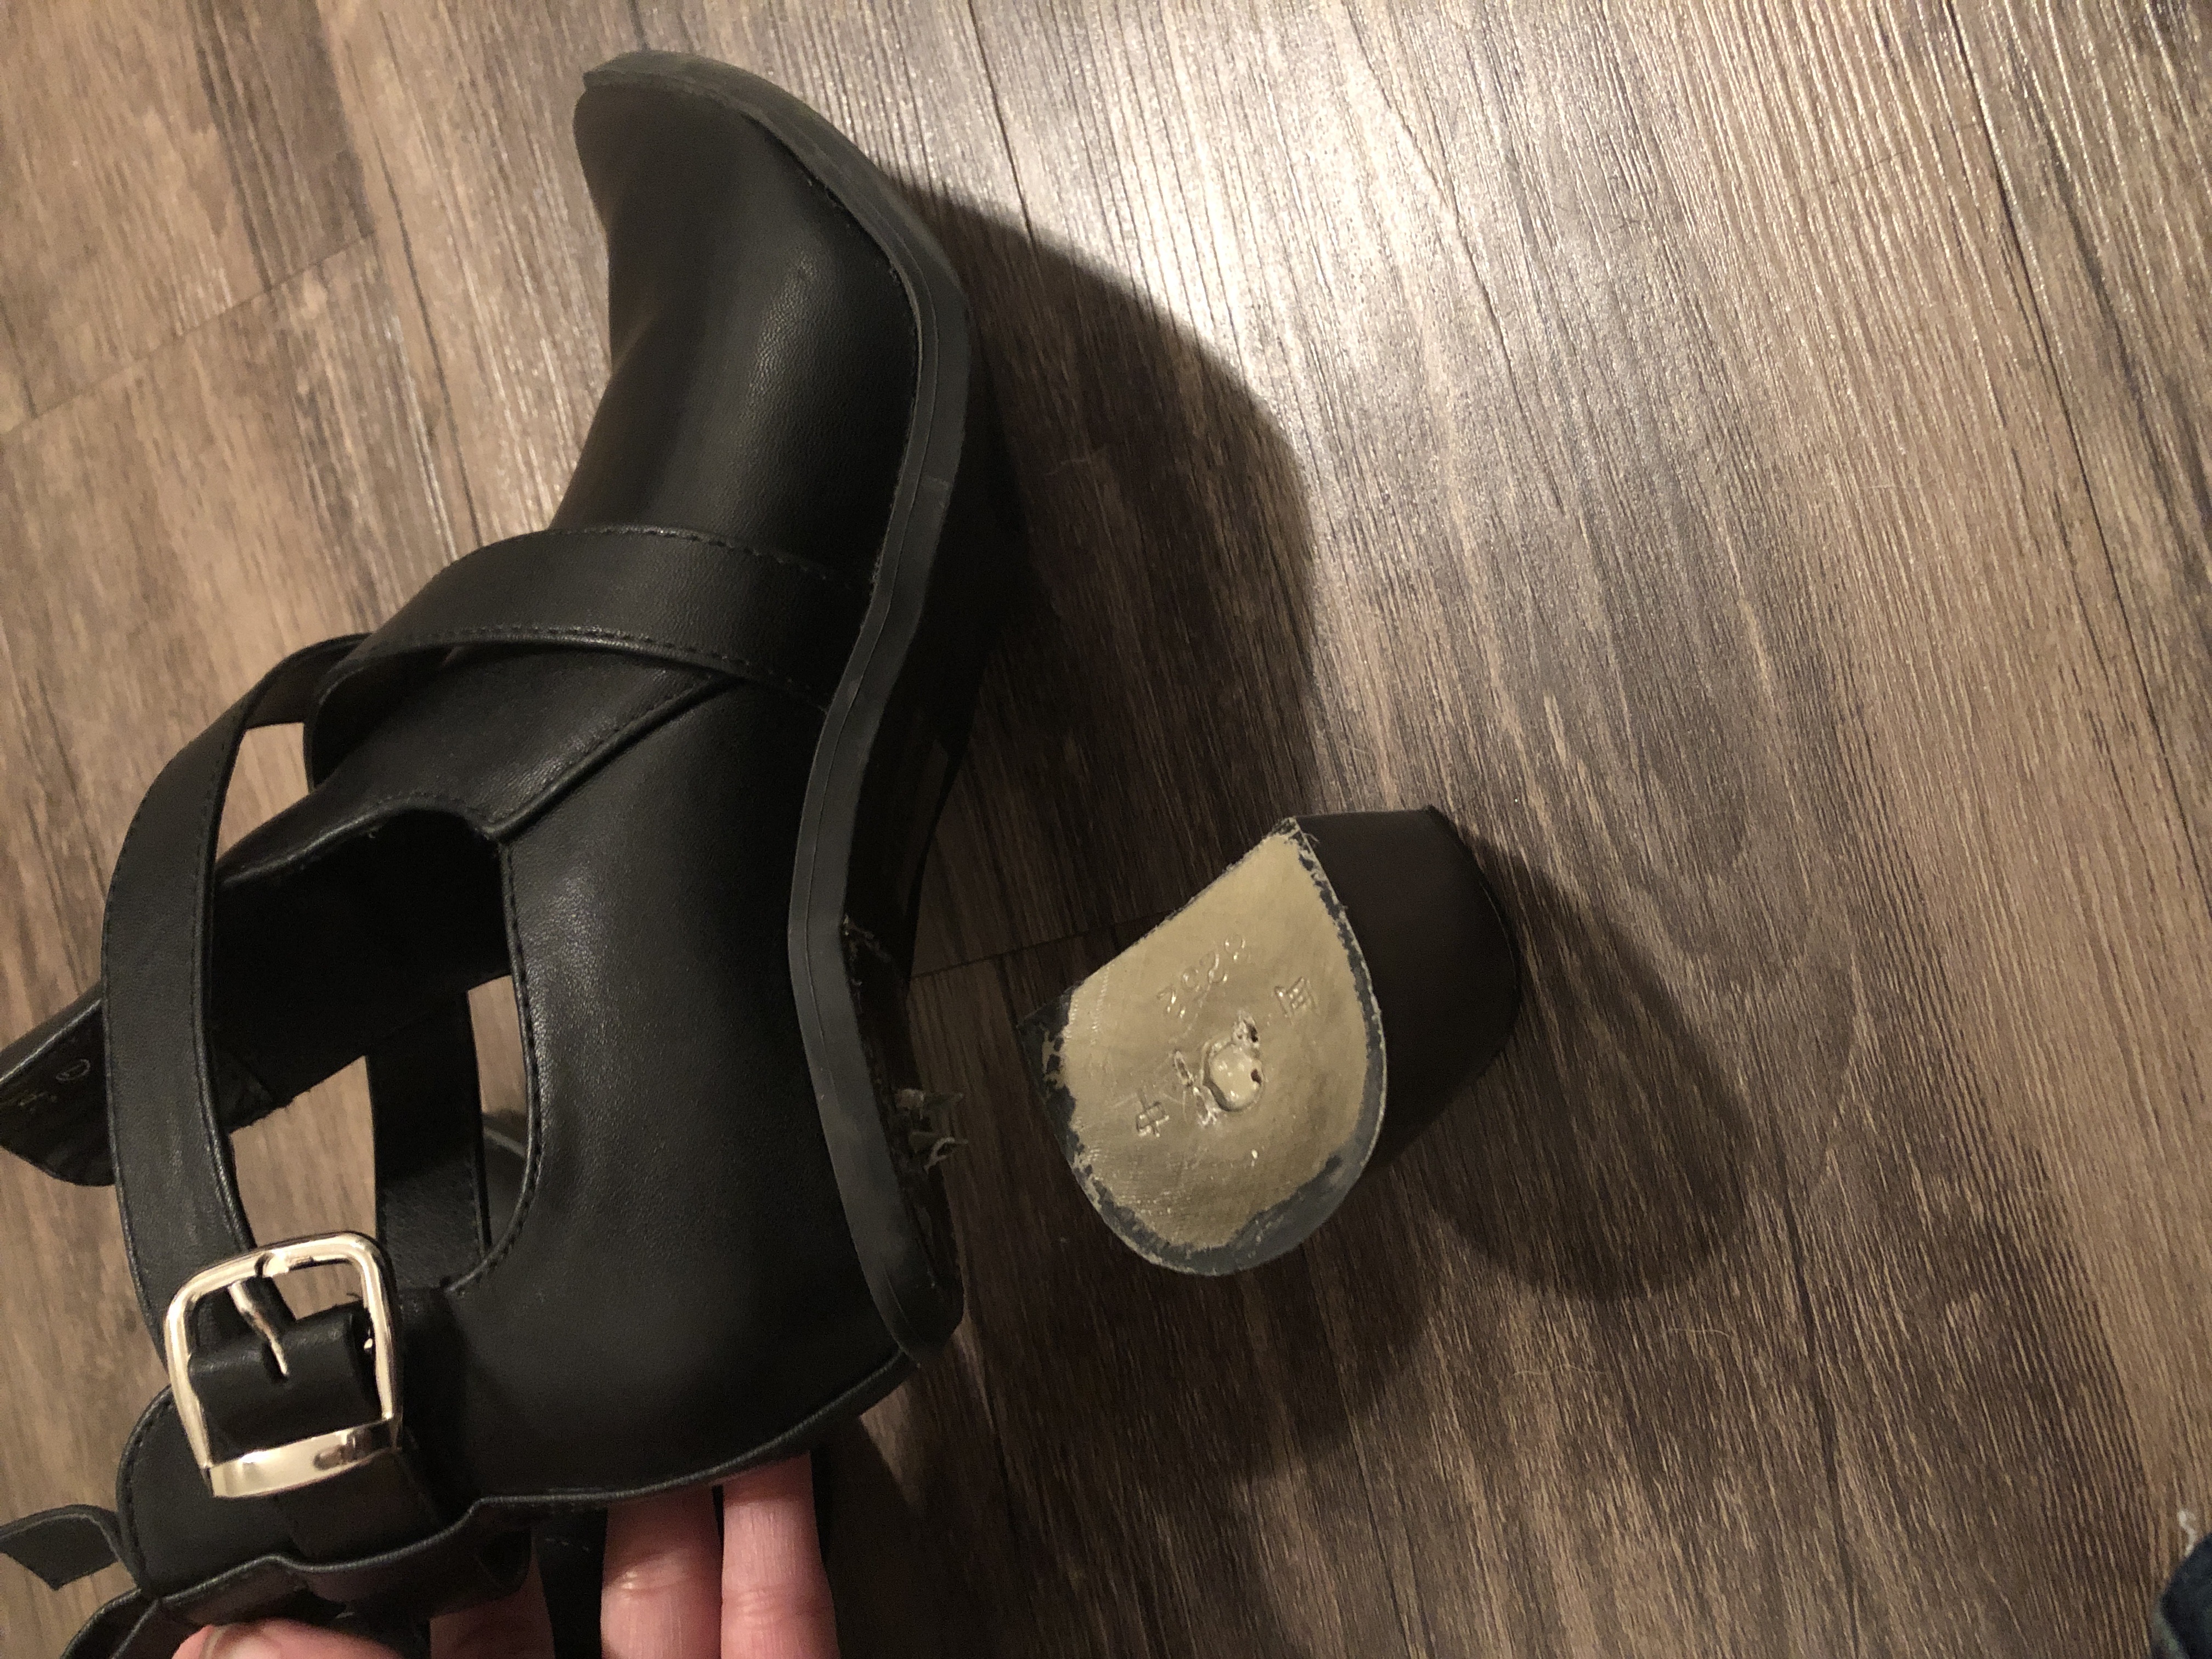 Miss Lola Shoes Review - Must Read This Before Buying